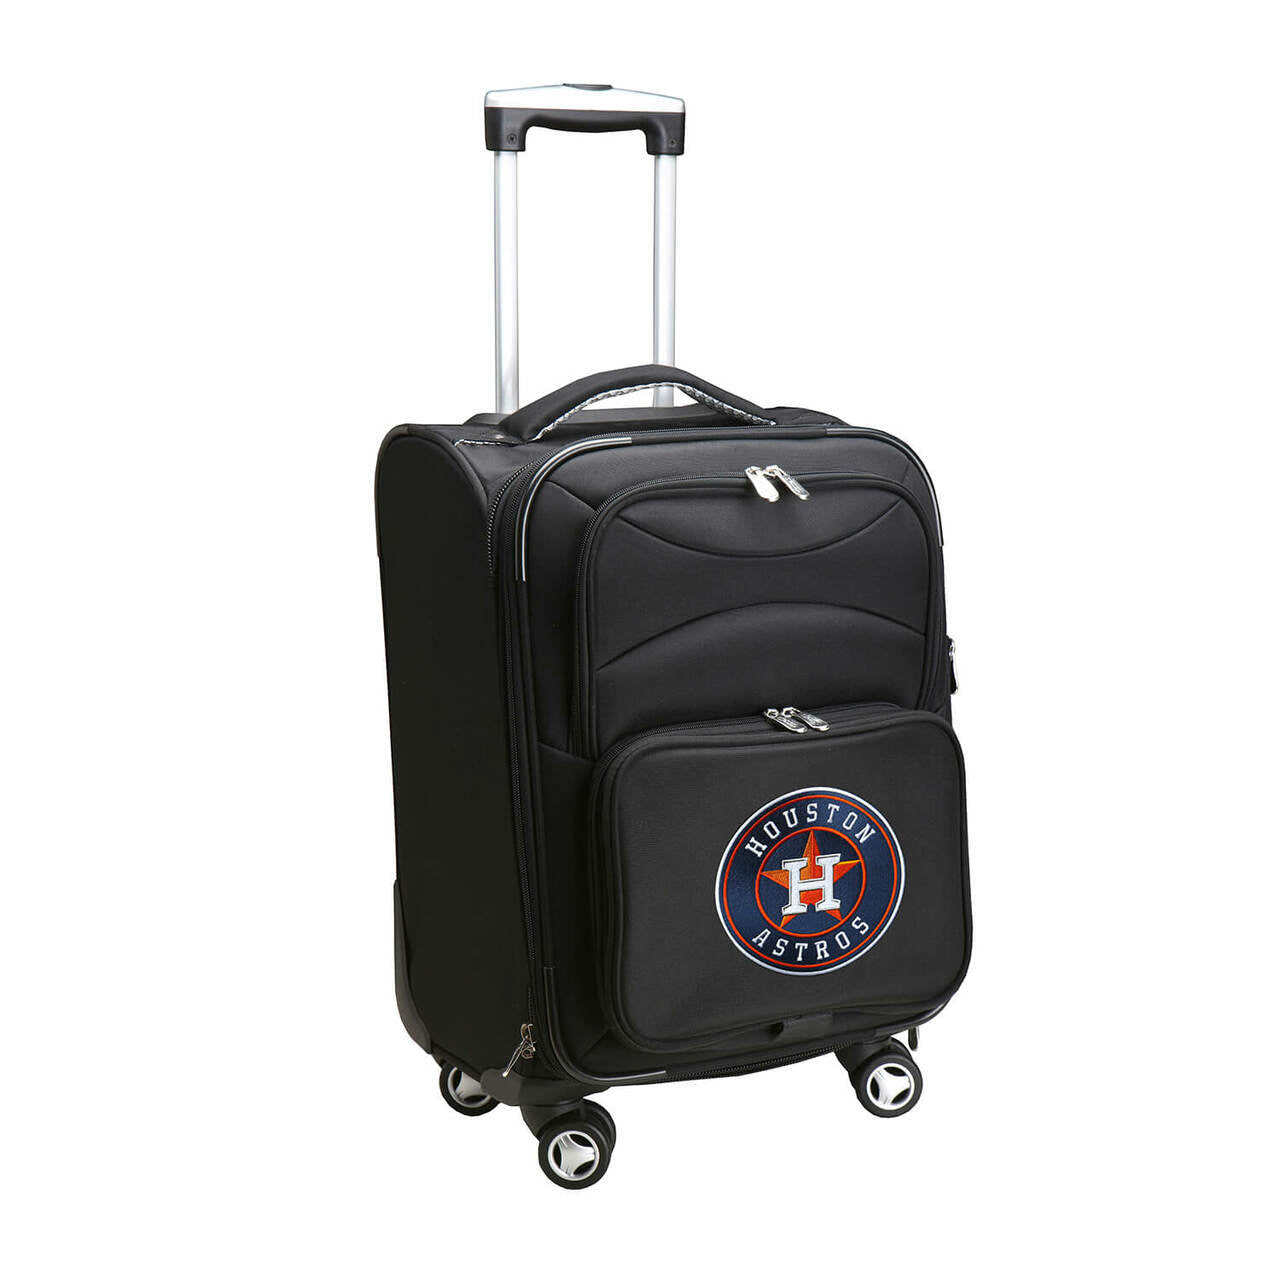 Houston Astros 21" Carry-on Spinner Luggage